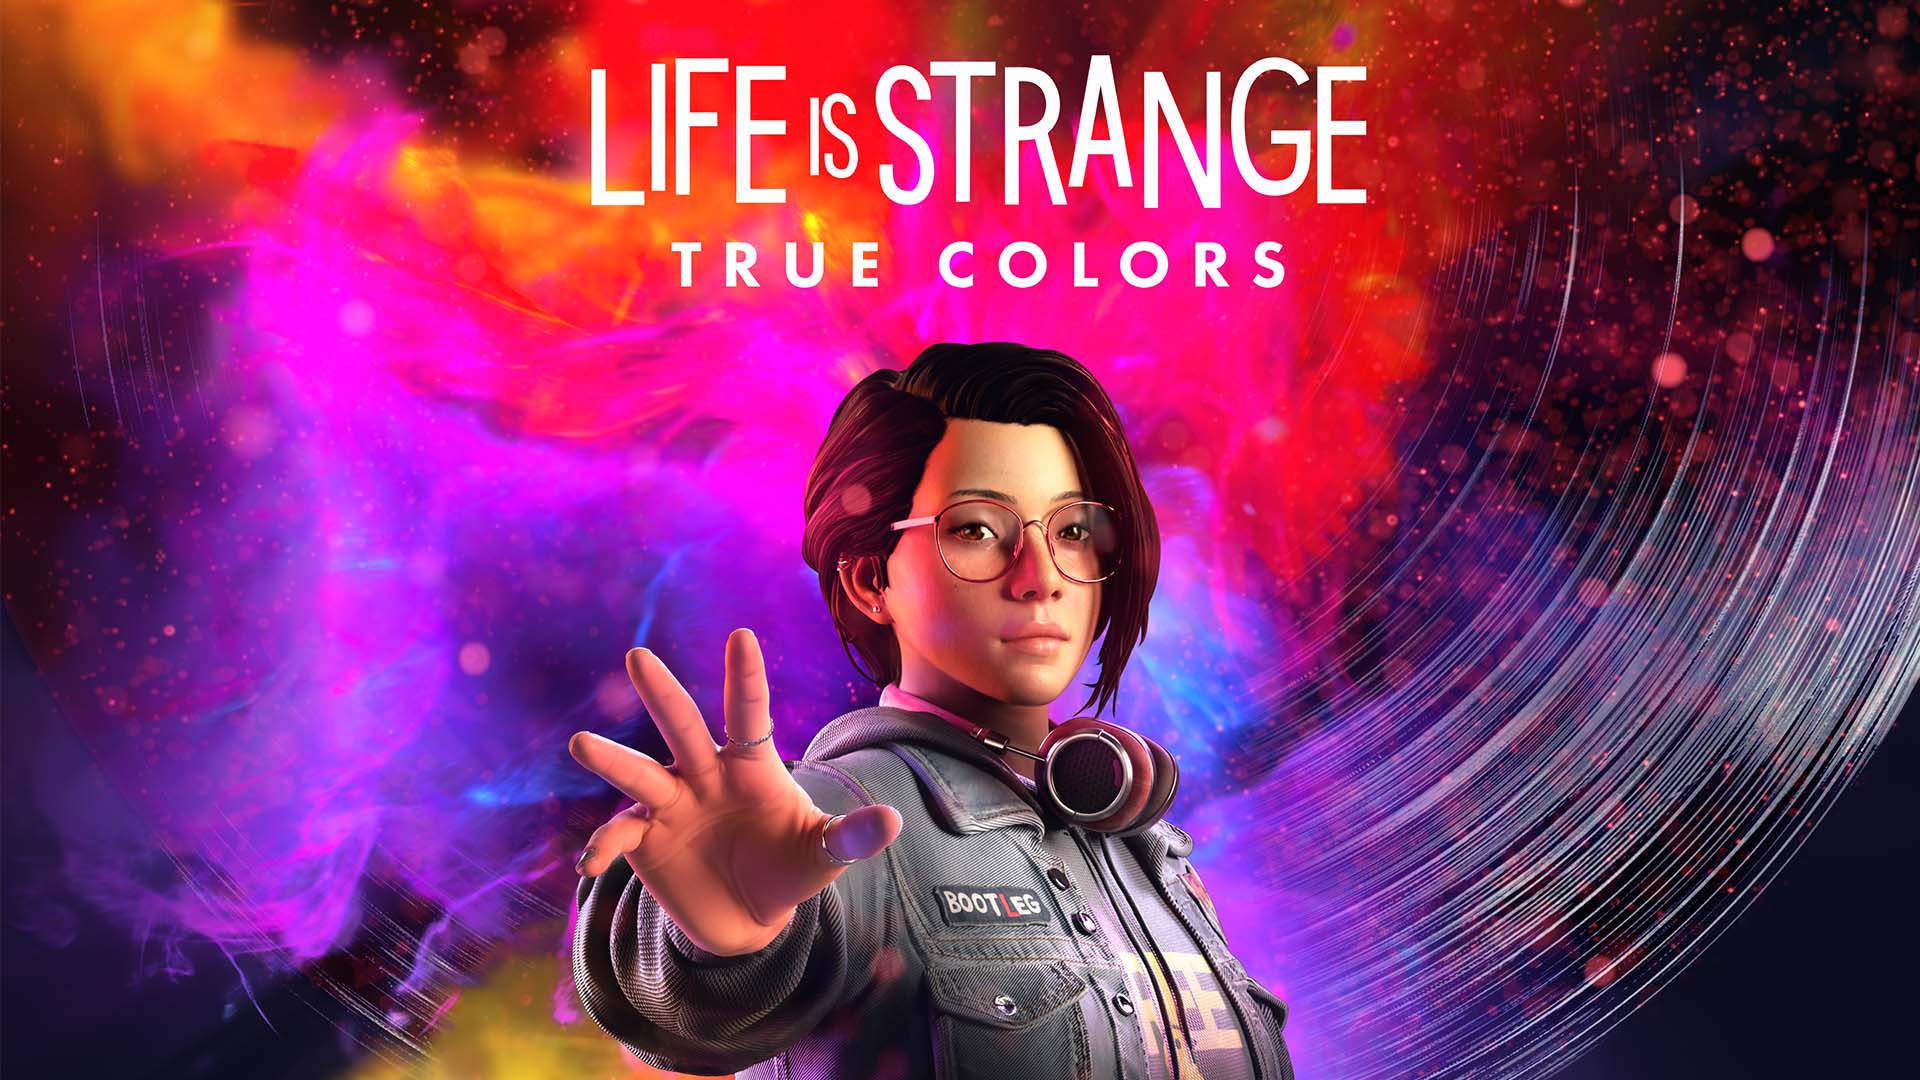 Life is Strange: True Colors Keyart – Alex Chen Power Pose against colourful background